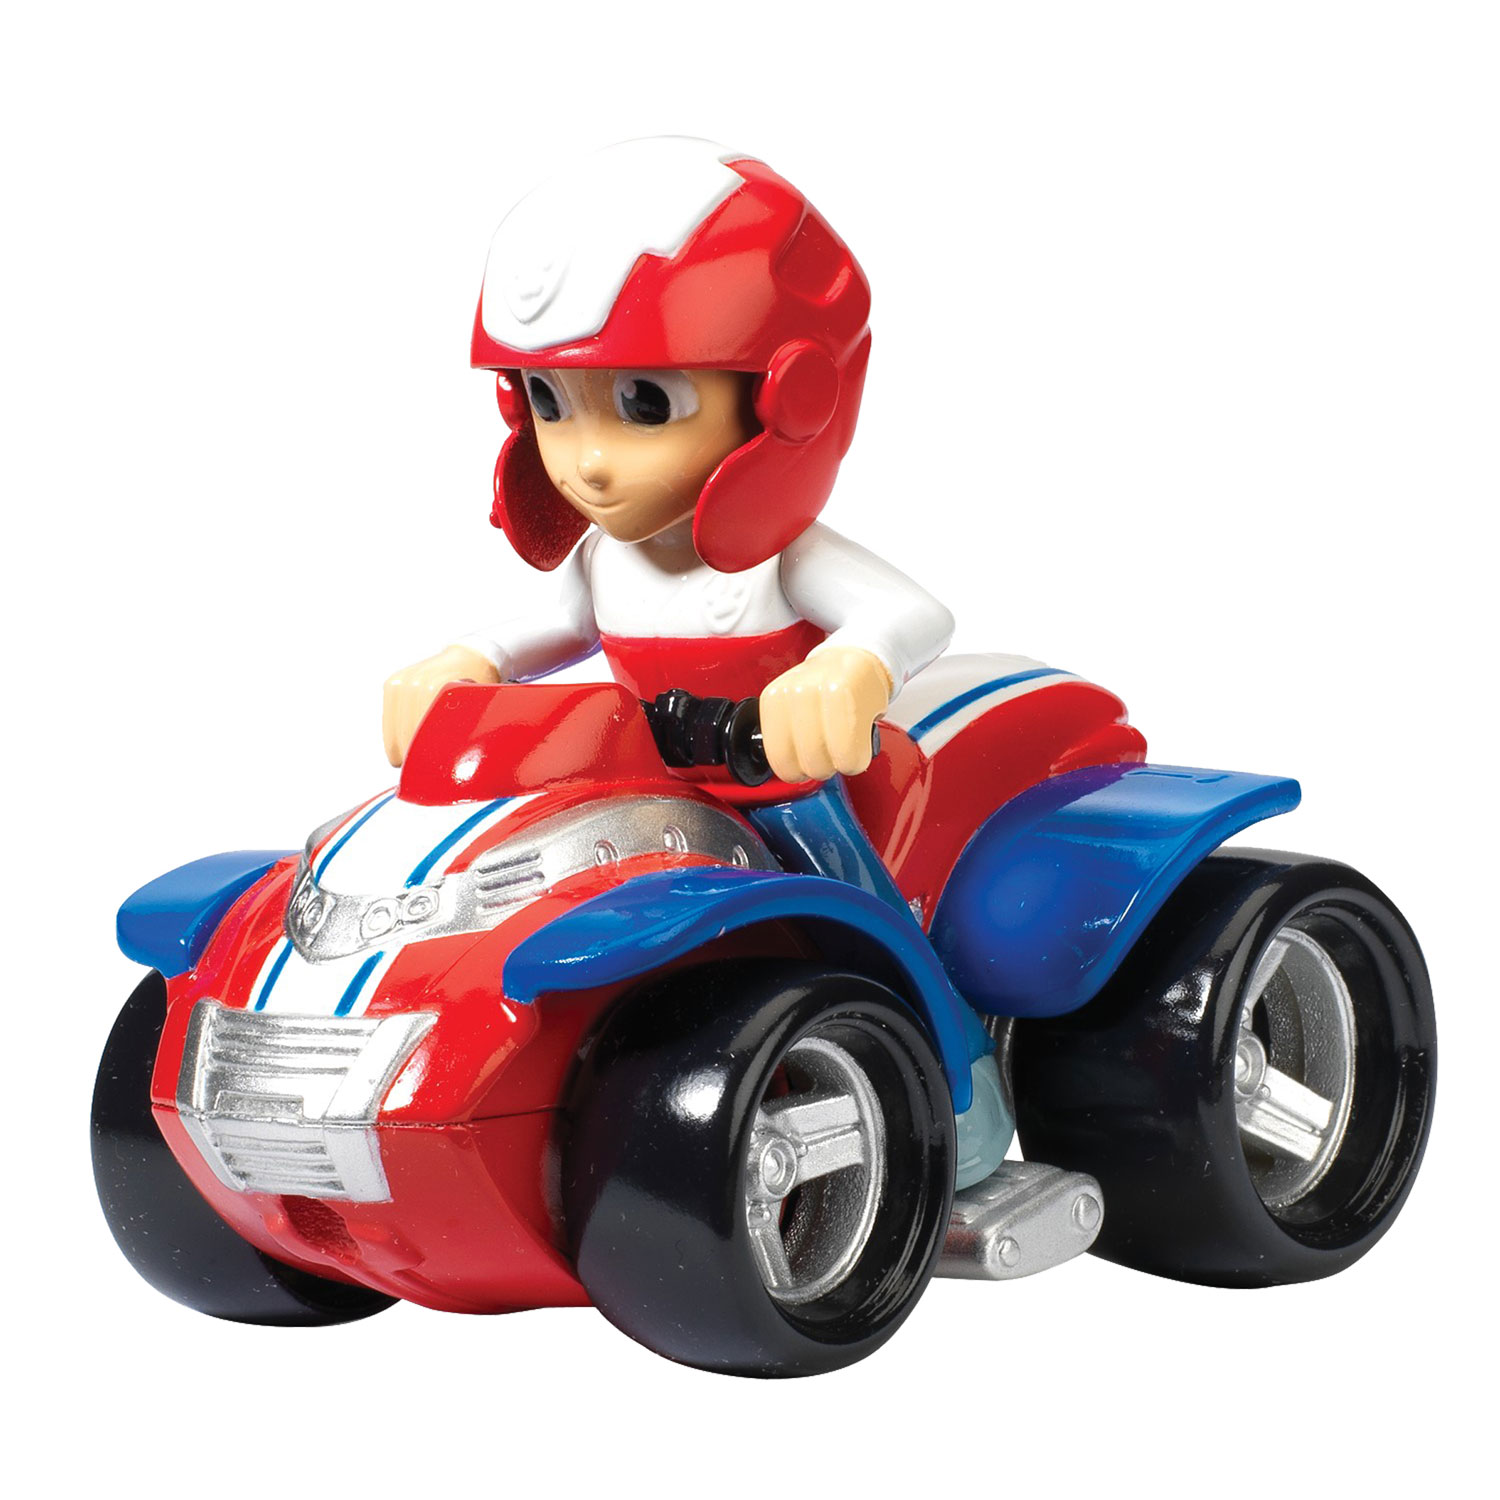 PAW Patrol Rescue Racers - Ryder